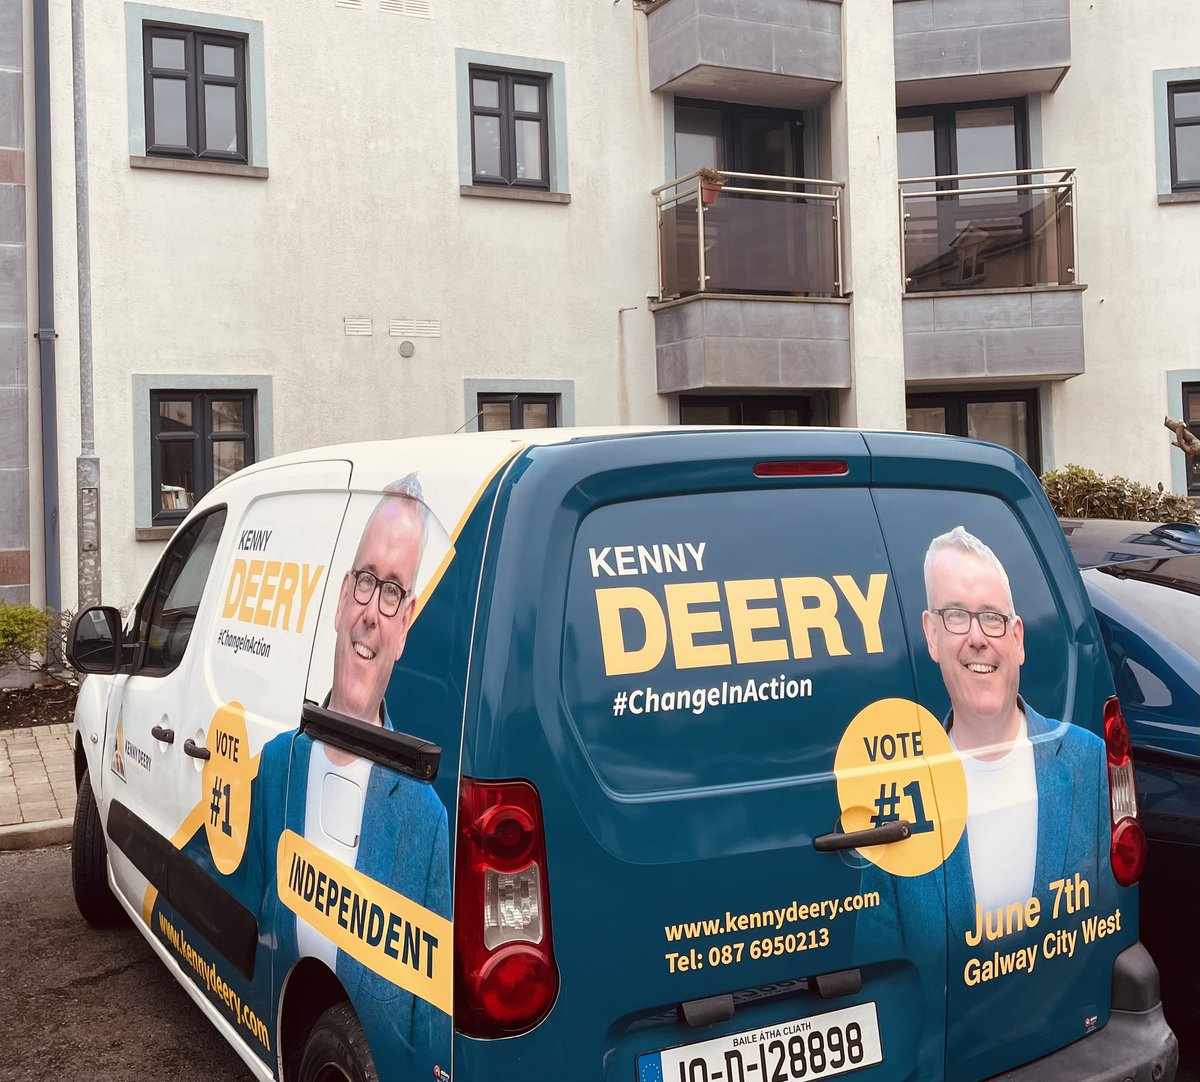 Meet ‘Betsy’, the Kenny Deery campaign mobile HQ! You’ll see a lot of ‘Betsy’ in the coming weeks as the #team4change meet as many people as possible across Galway City West. Pop over to KennyDeery.com for more info. 🙏